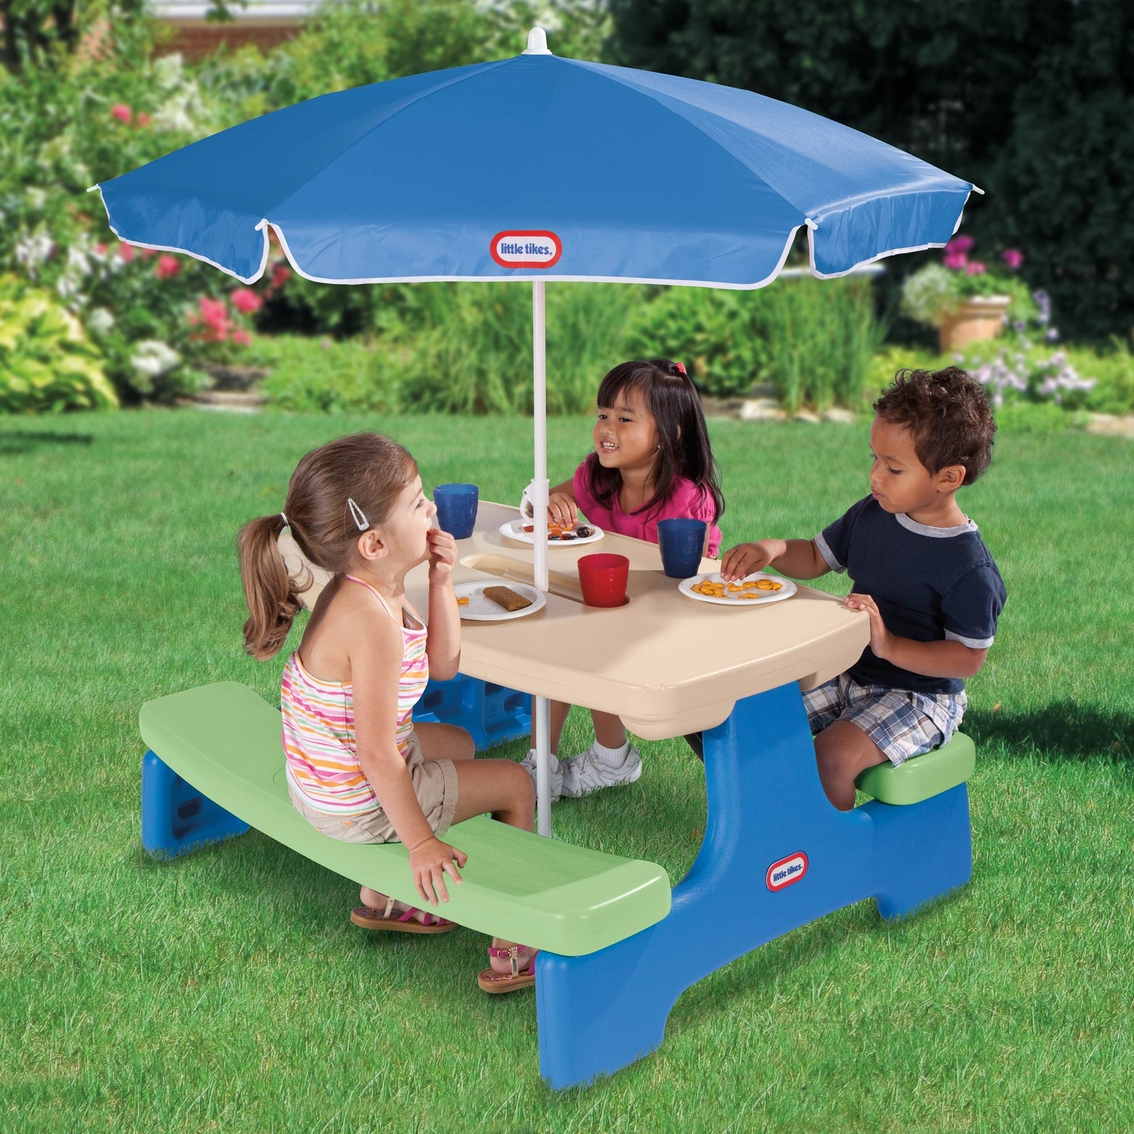 Little Tikes Easy Store Picnic Table With Umbrella - Image 2 of 3